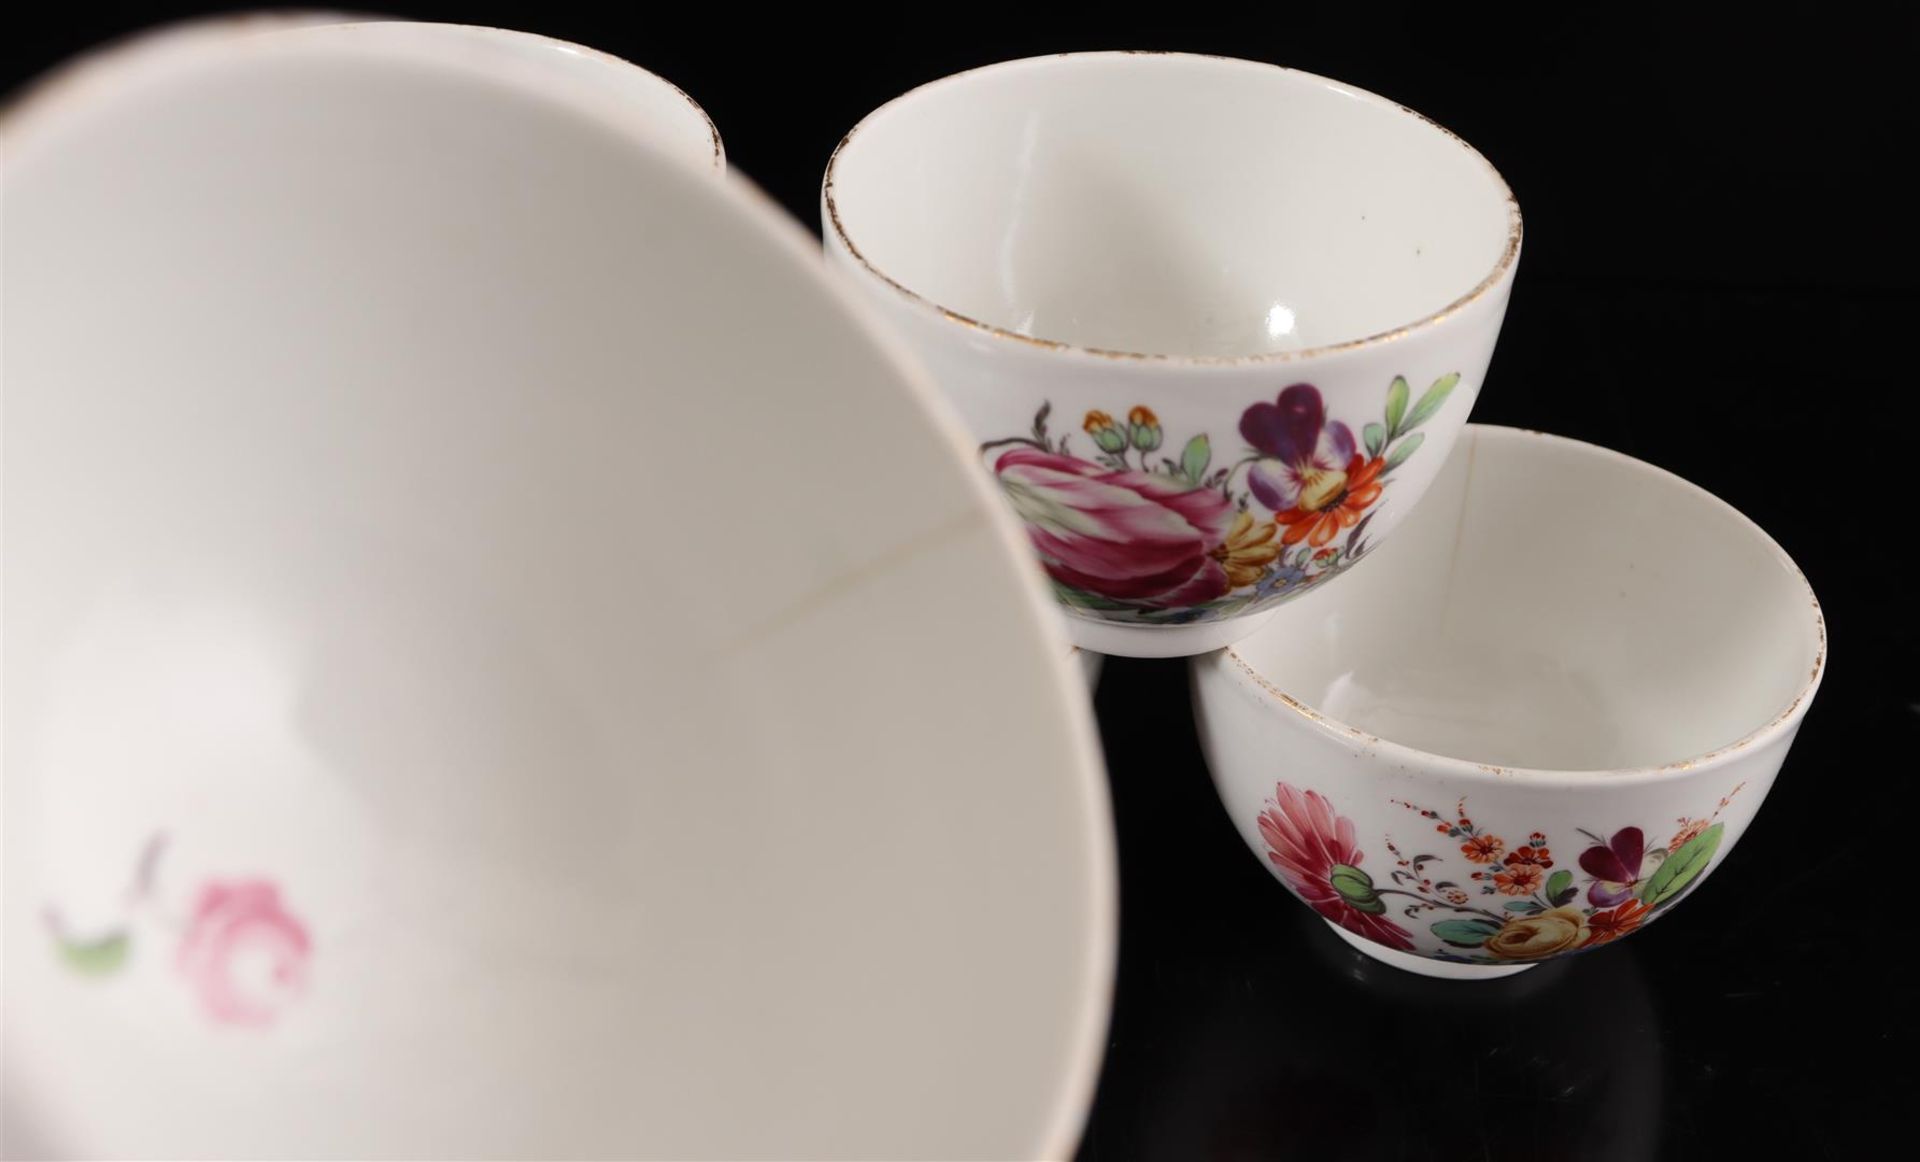 7 cups and 6 porcelain saucers - Image 5 of 6